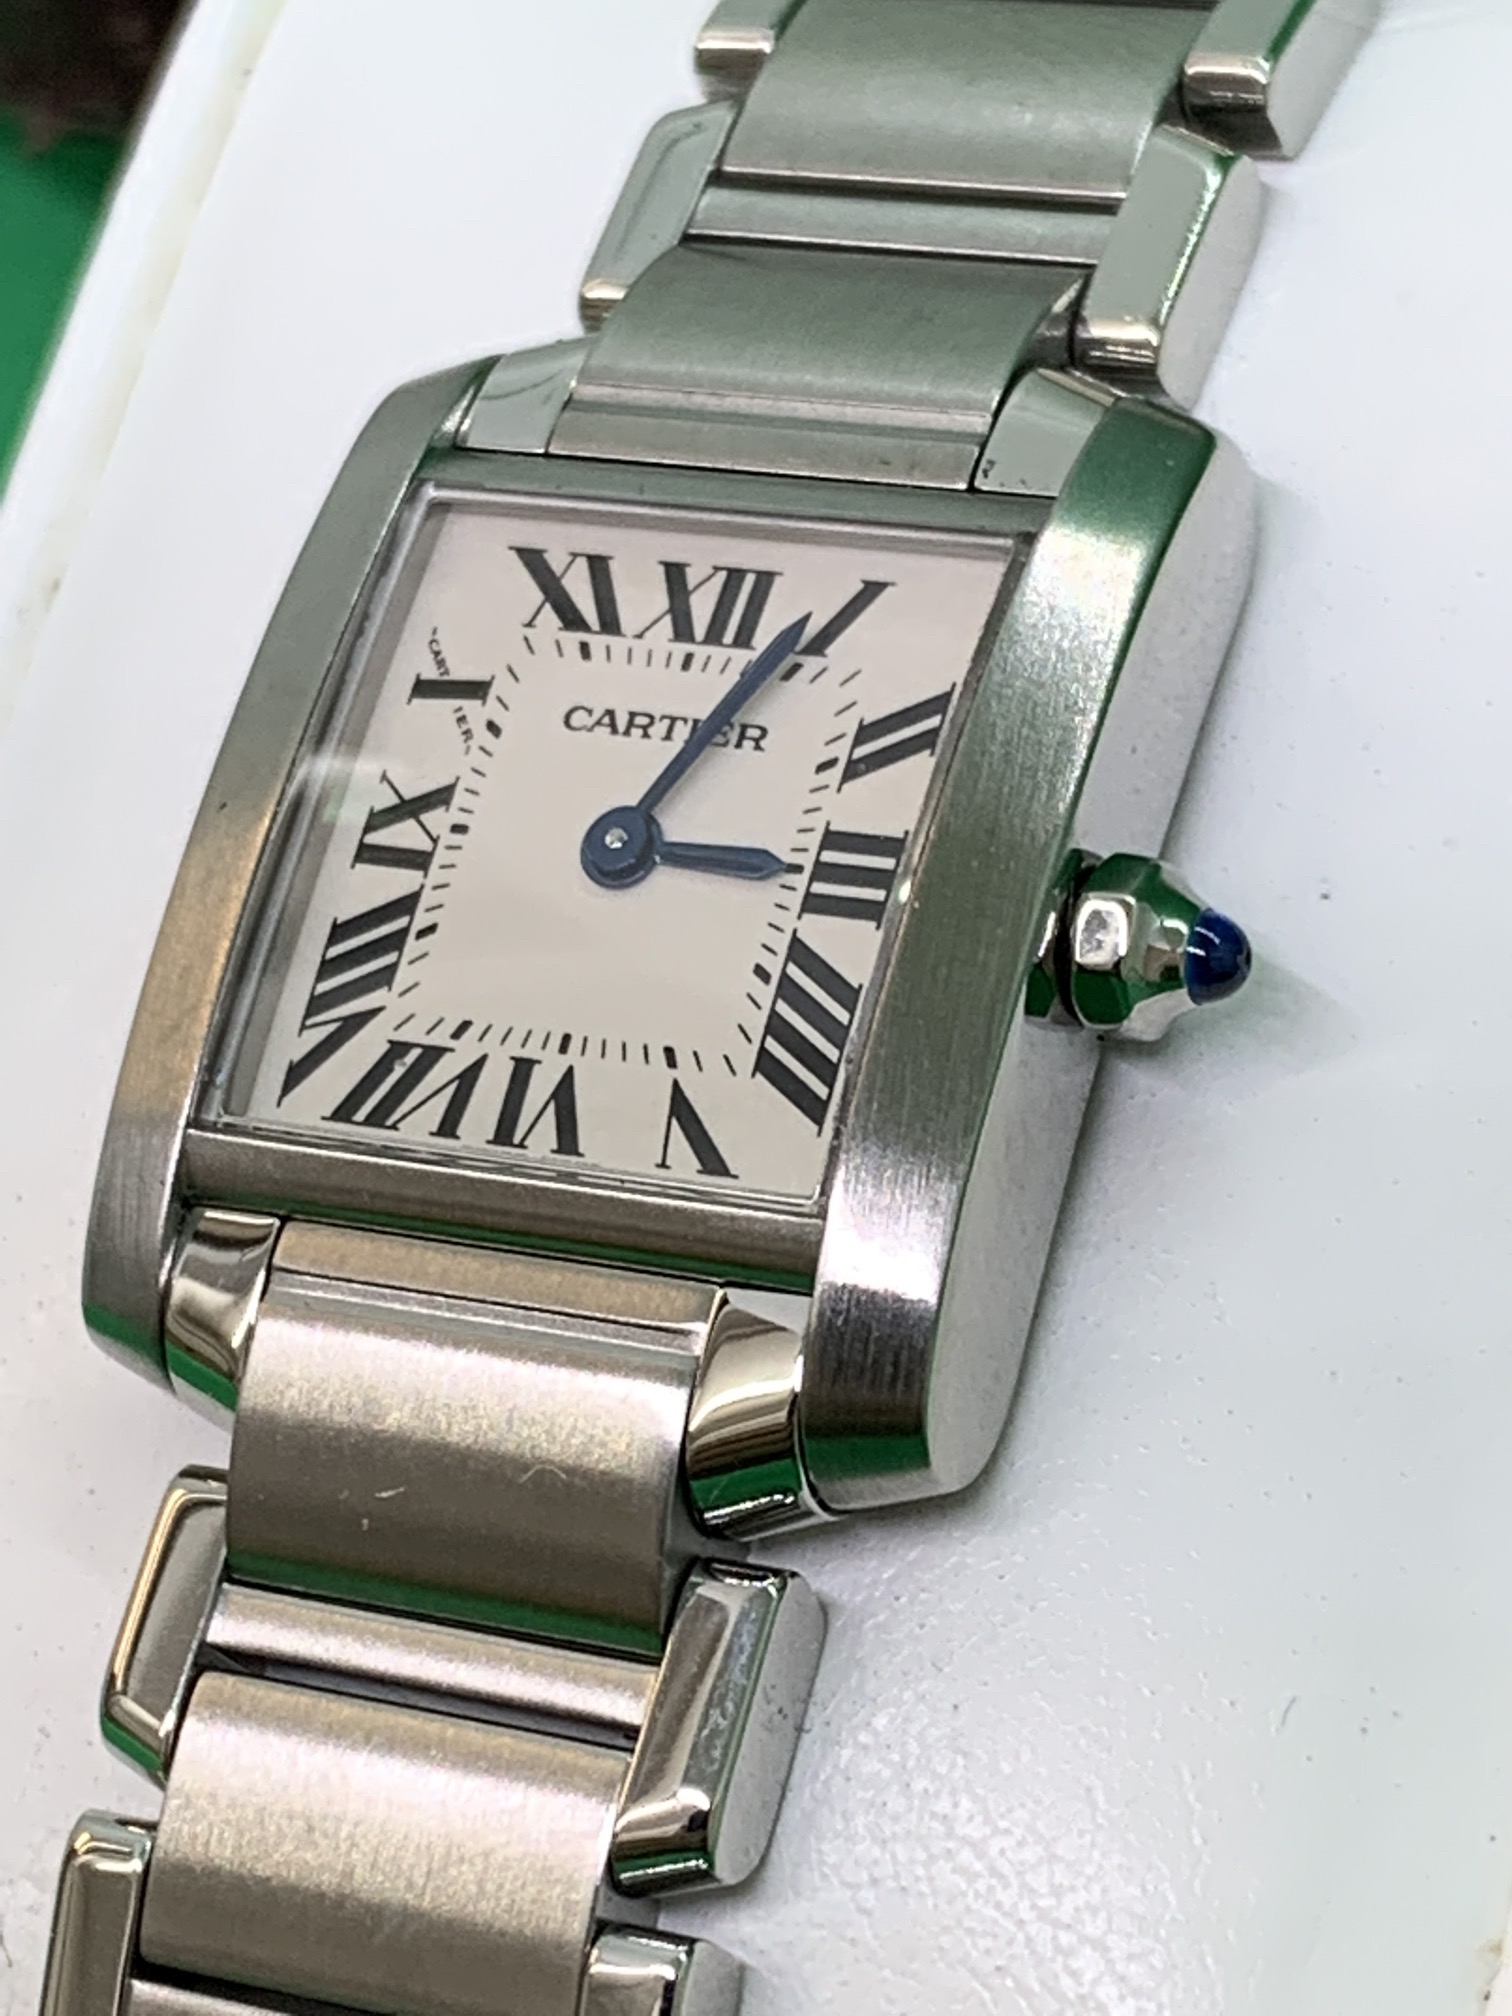 CARTIER STAINLESS STEEL WATCH - Image 2 of 5